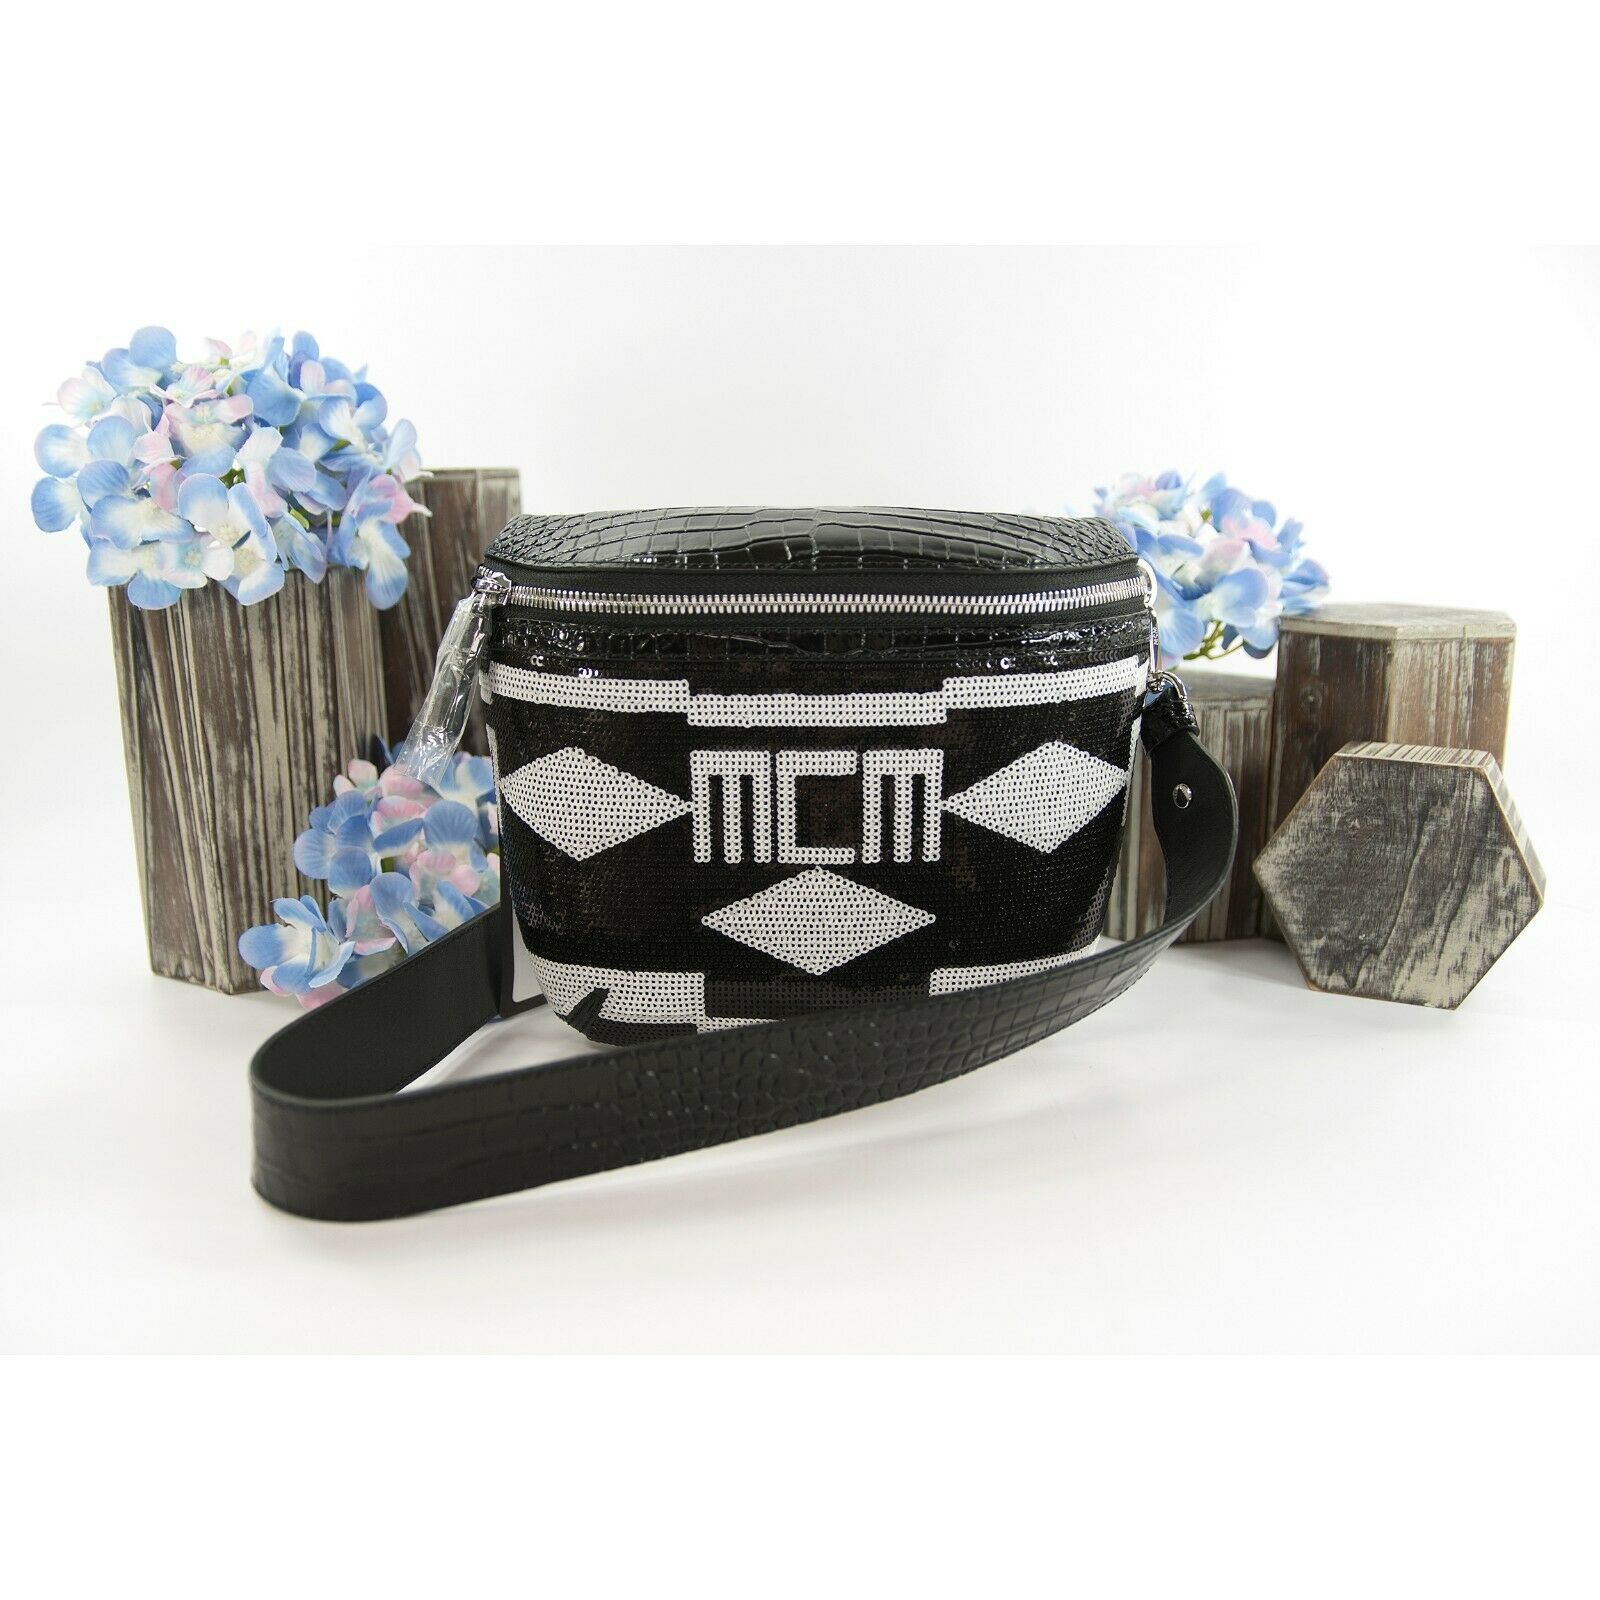 MCM Limited Edition Crossbody Bags